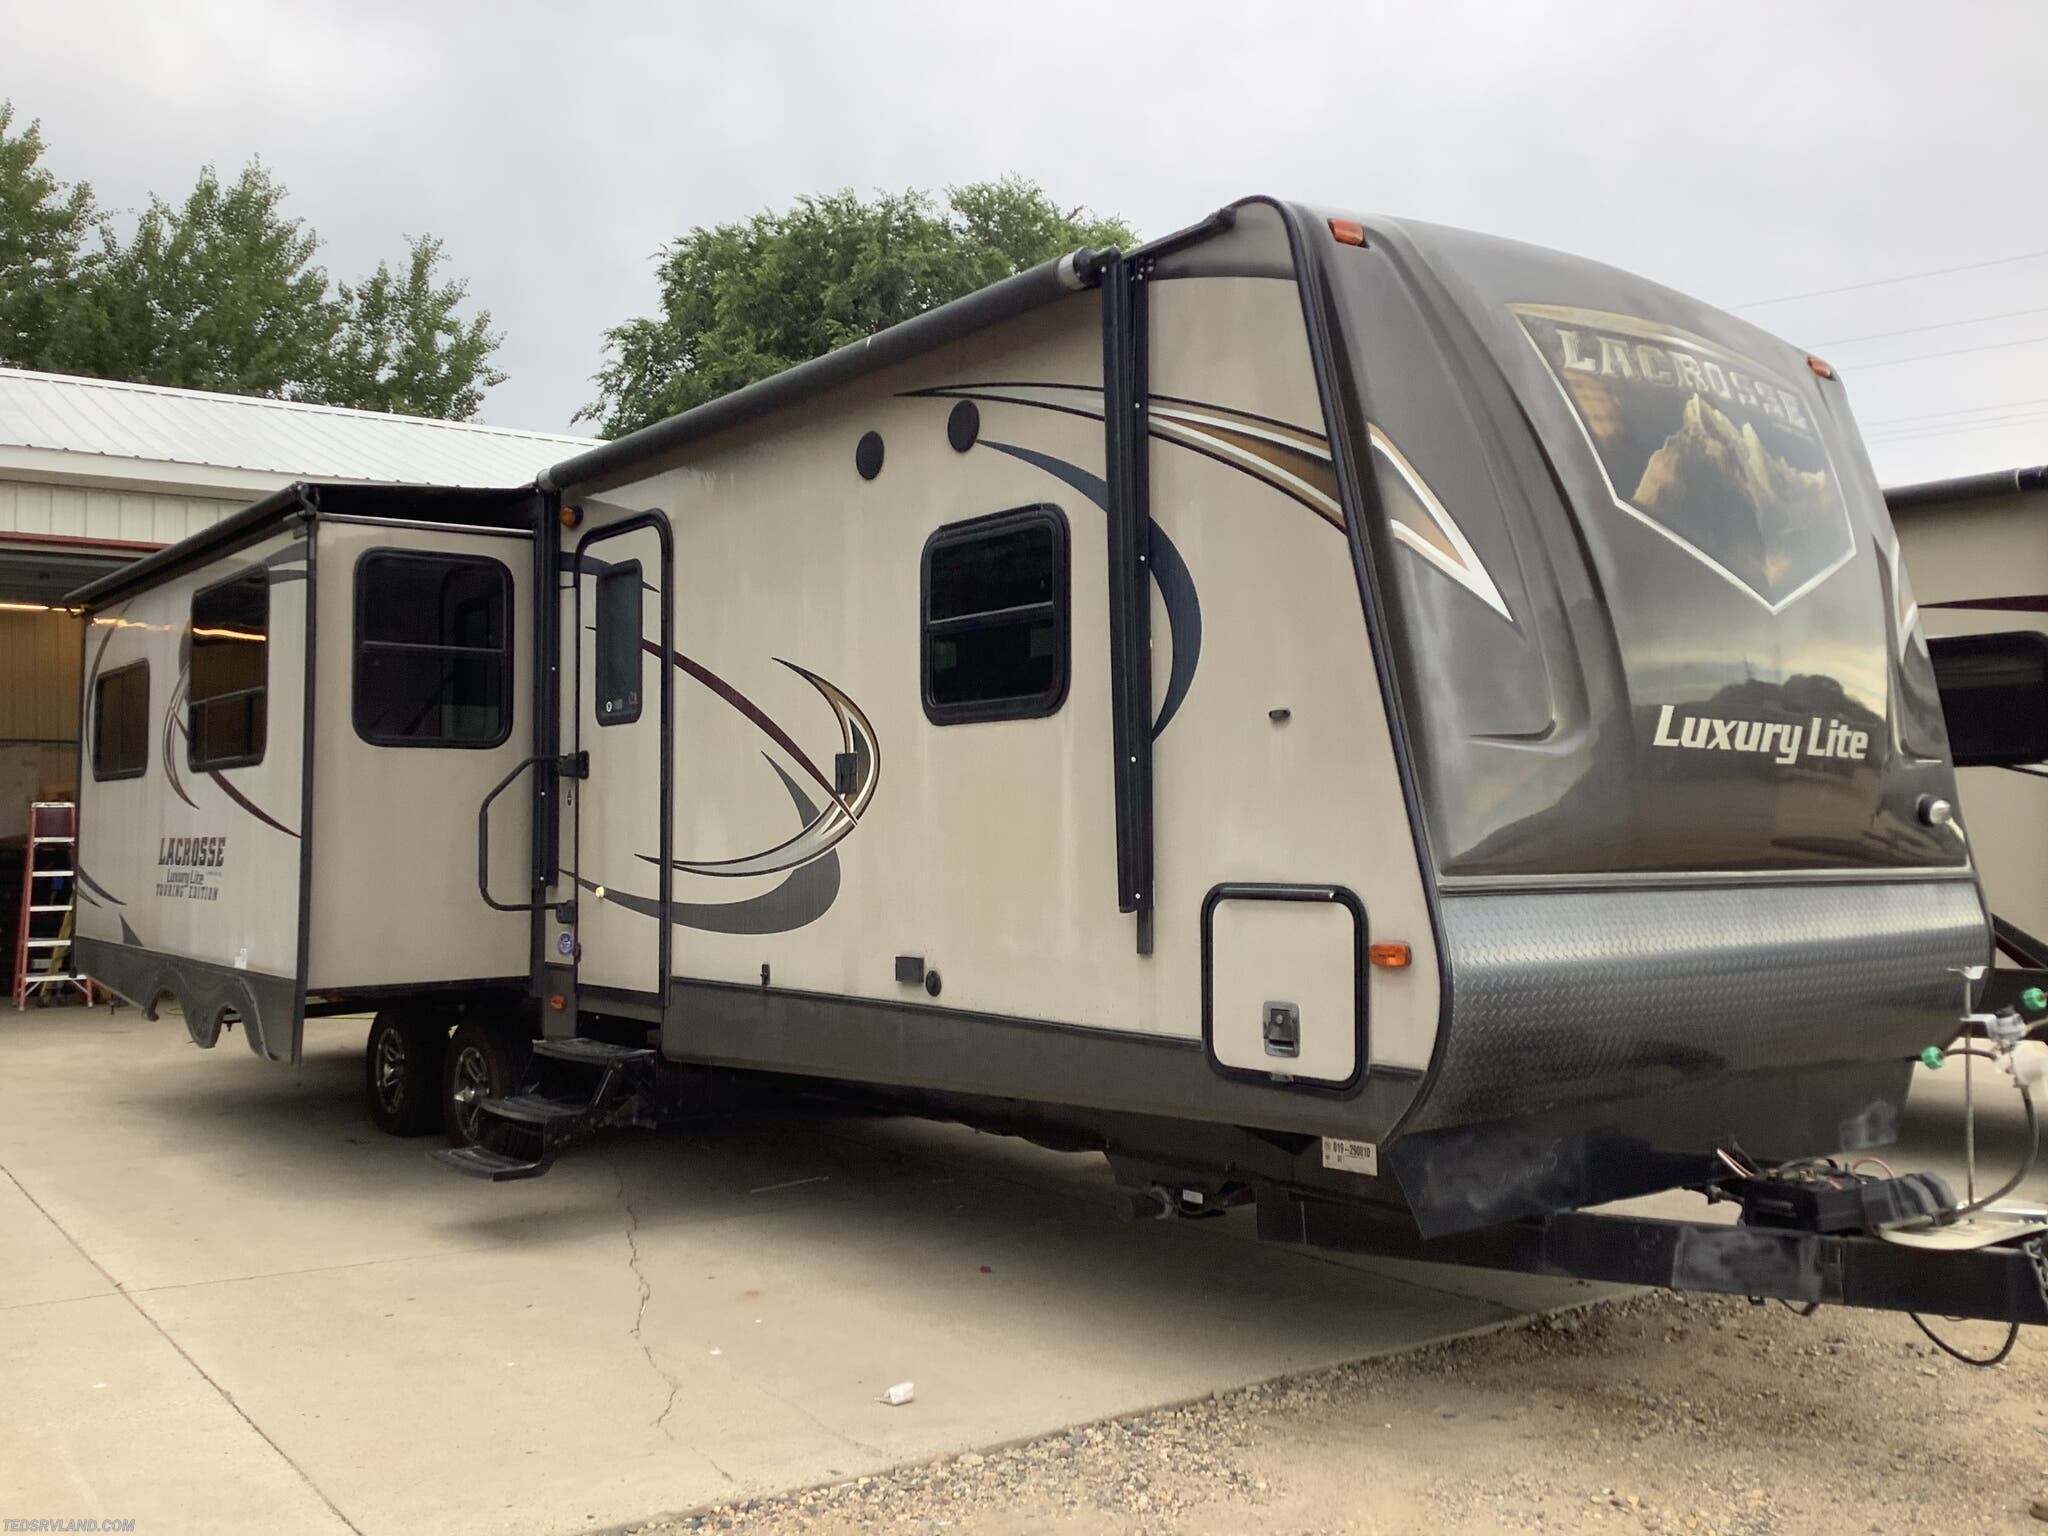 2014 Prime Time LaCrosse Luxury Lite 324 RST RV for Sale in Paynesville 2014 Prime Time Lacrosse Luxury Lite